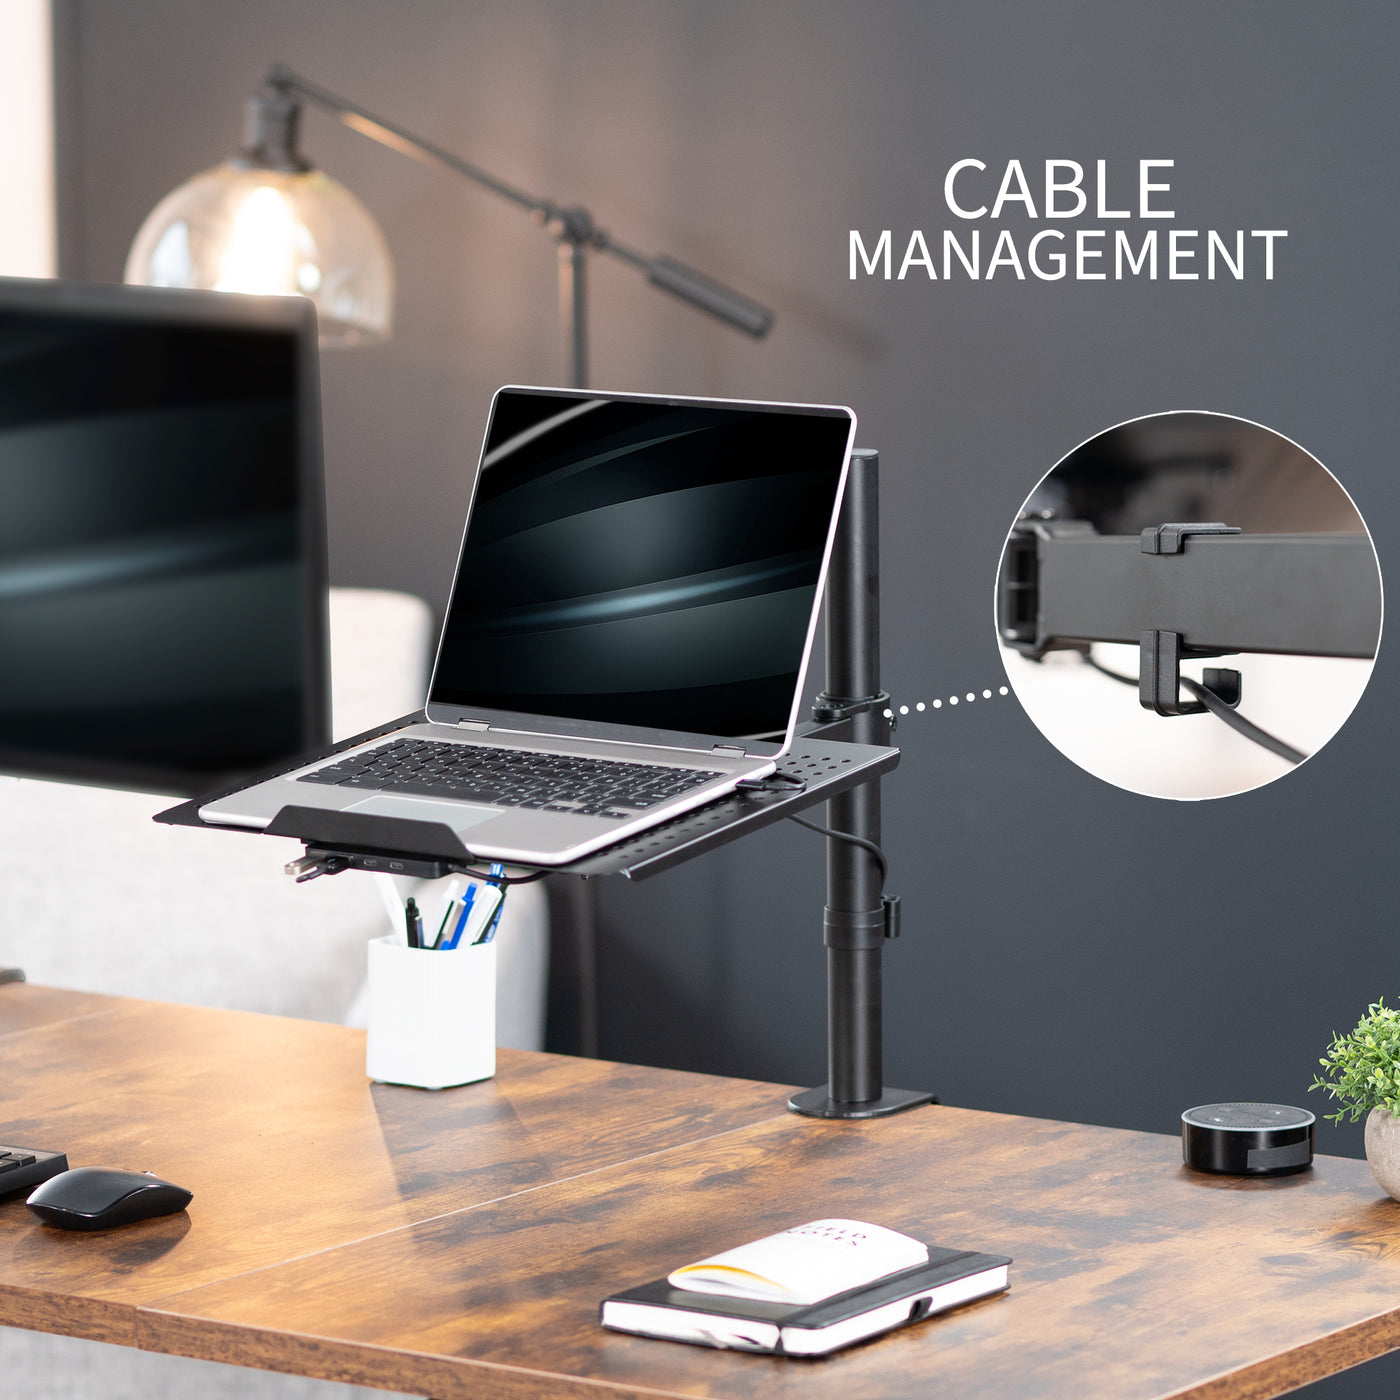 Height adjustable clamp-on laptop stand with USB ports, ventilation, and cable management.